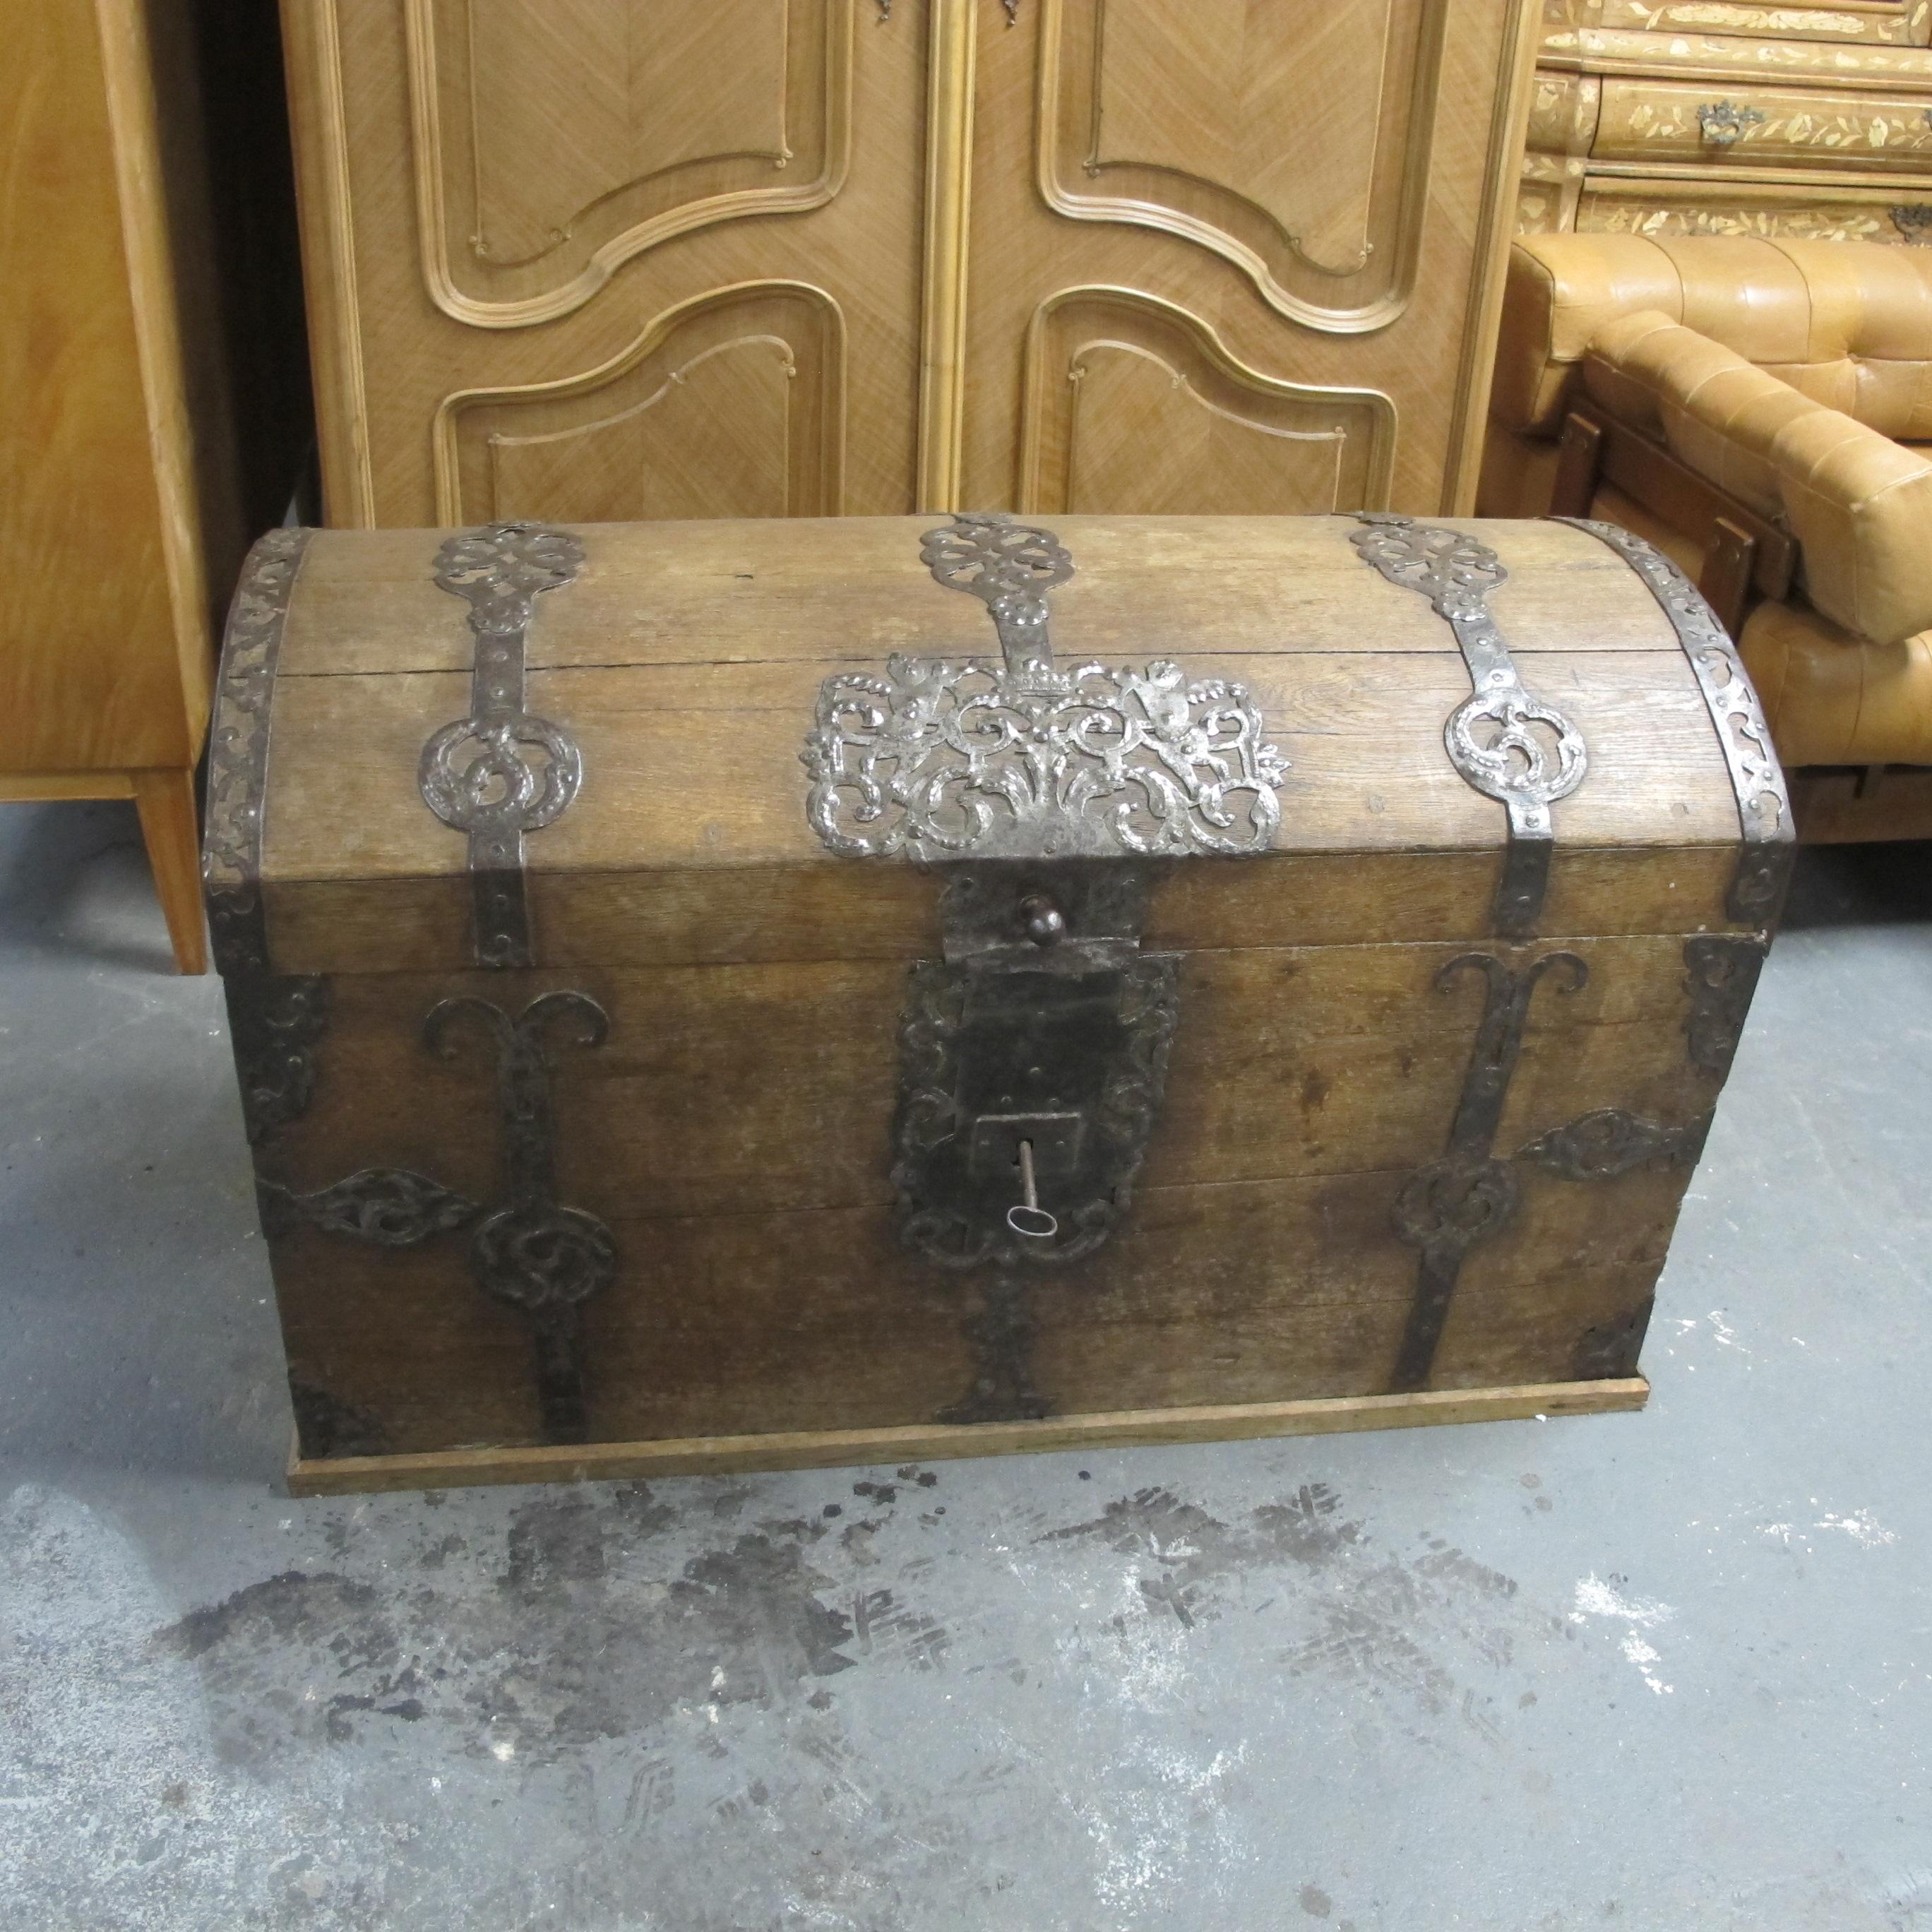 Antique 18th Century Trunk-Coffer with Dome Top and Ornate Metal Work 6